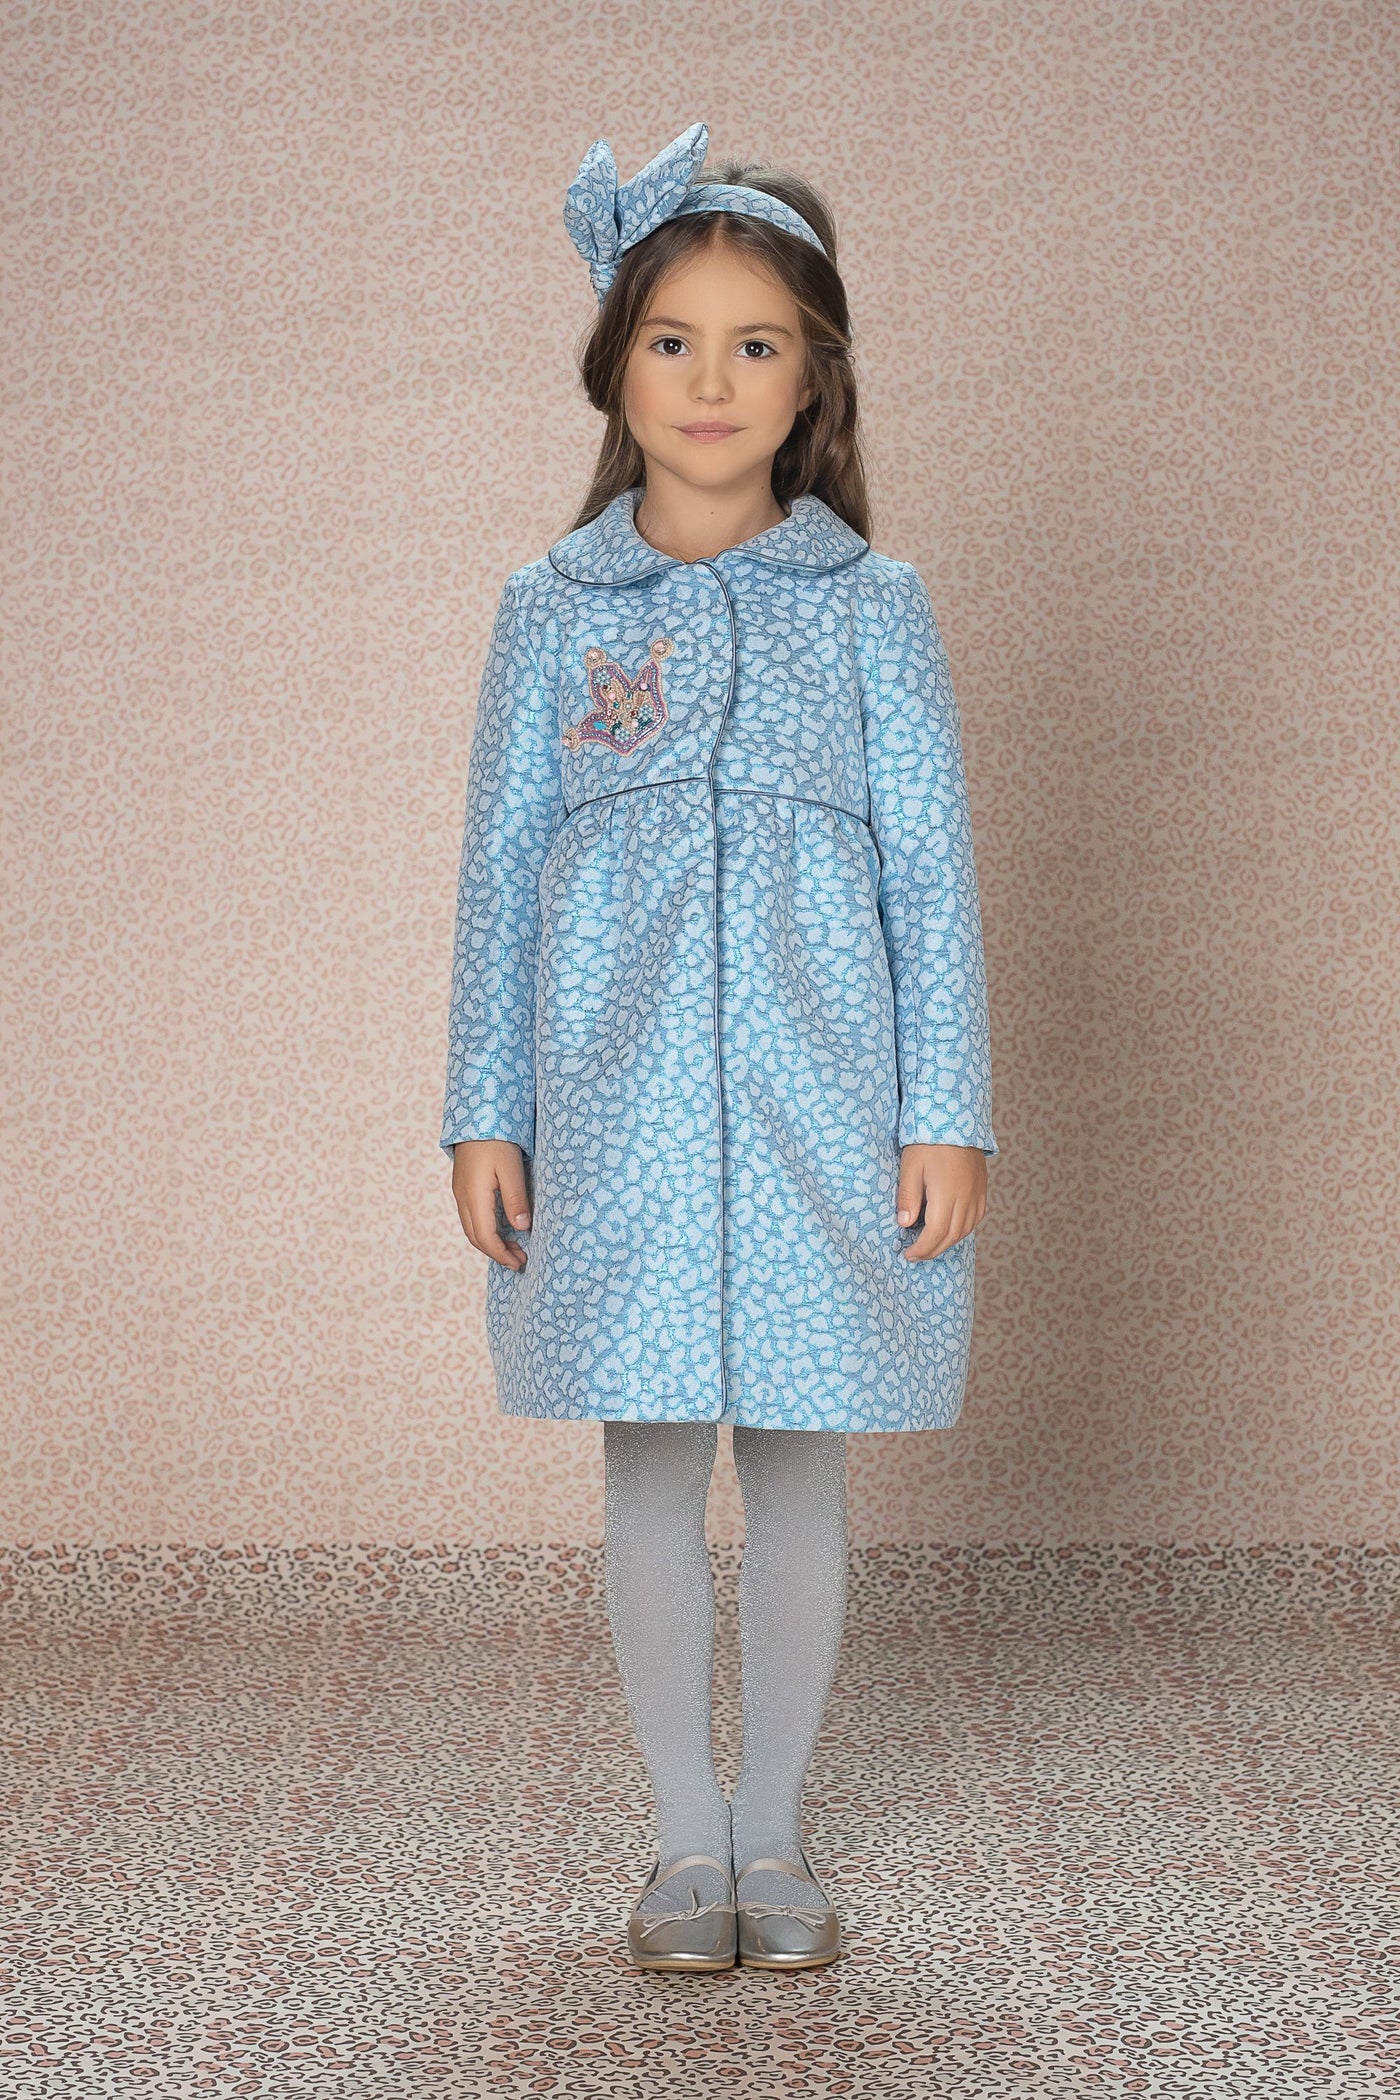 Blue animal pattern jacquard coat with hand-embellished crown